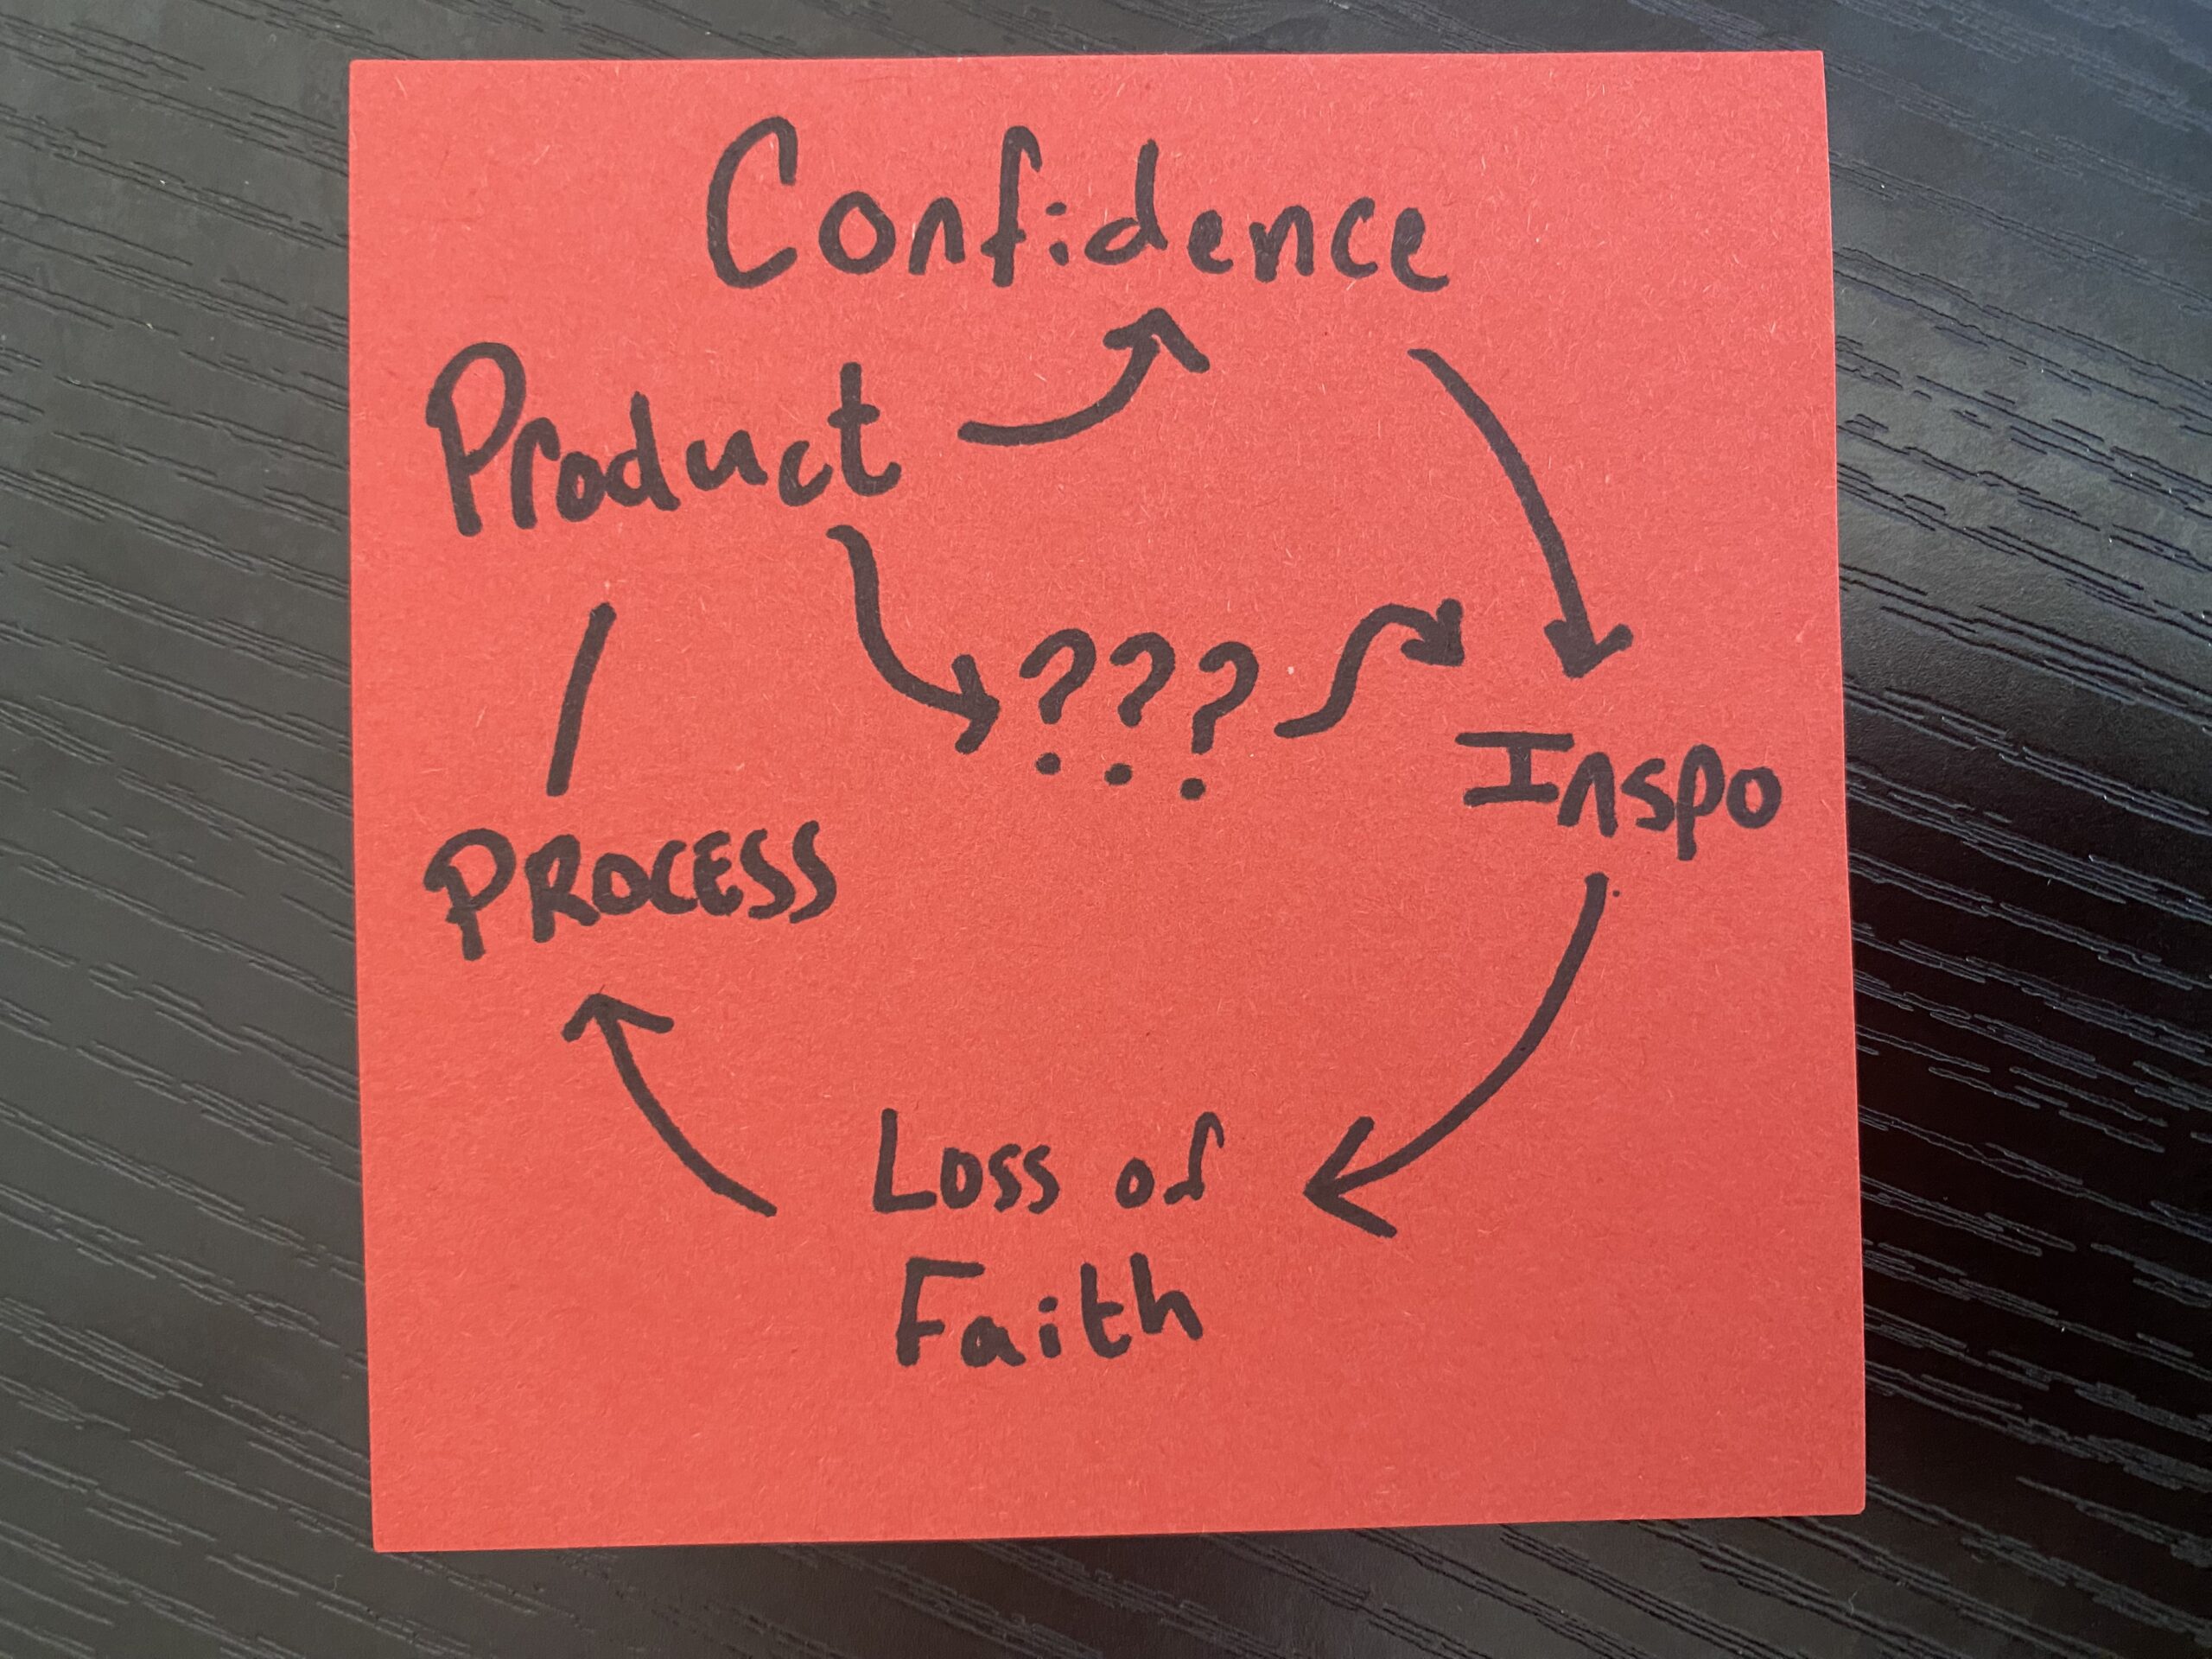 A chart showing a circle, with arrows pointing in this order: Confidence, Inspo, Loss of Faith, Process, Product, and then branching arrows. One points back to Confidence, and one points to question marks, which point to "Inspo."